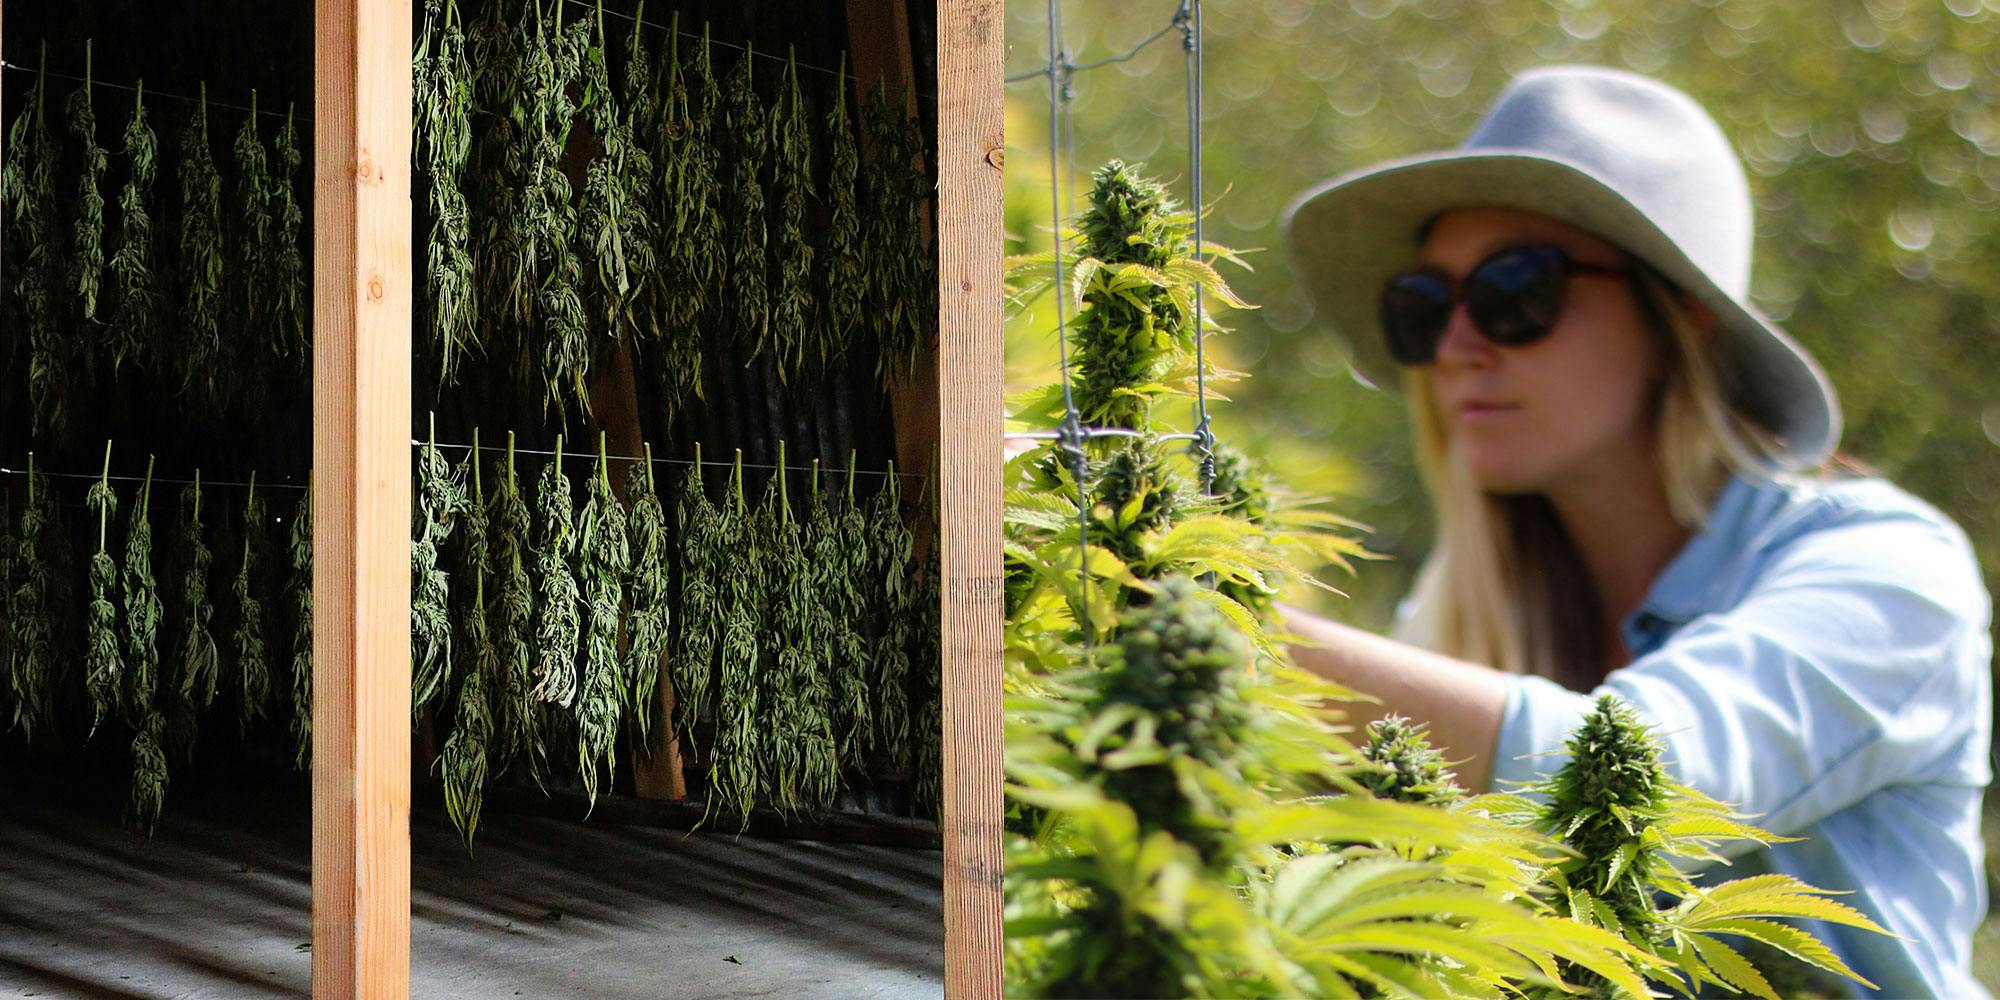 Woman tending to Cannabis plants in Humboldt, California